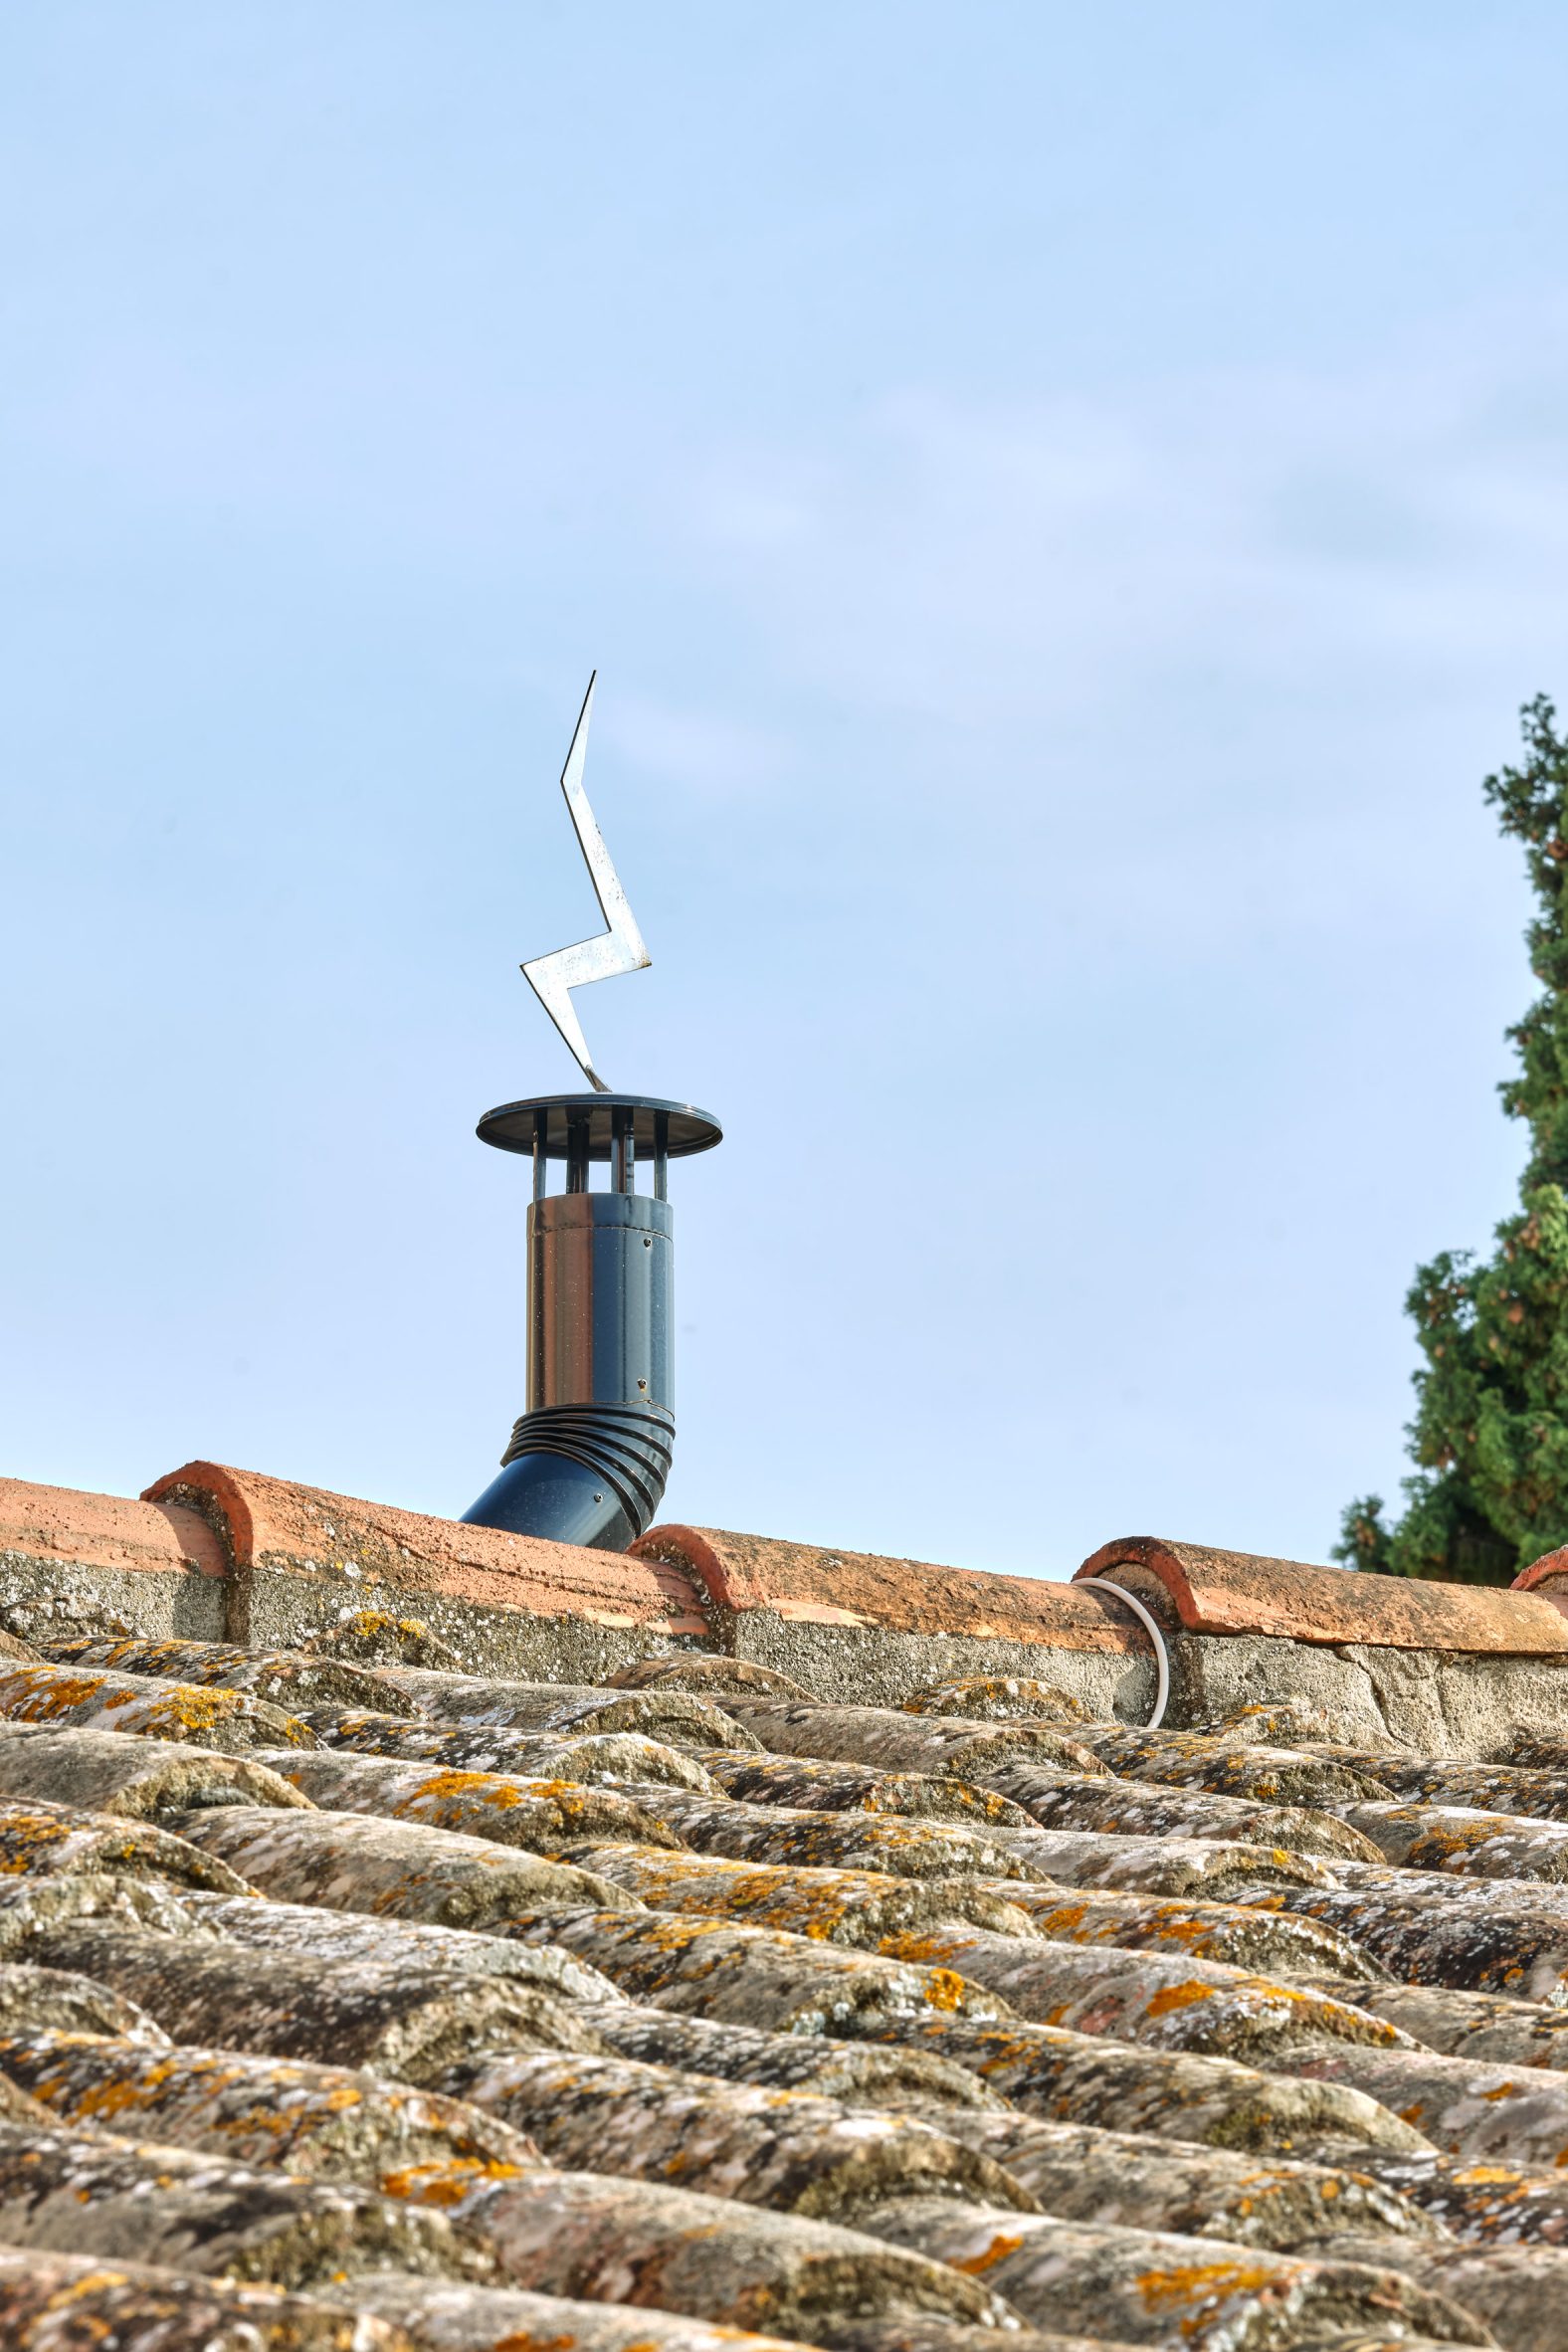 Sculptural lightning bolt sculpture coming out of the chimney